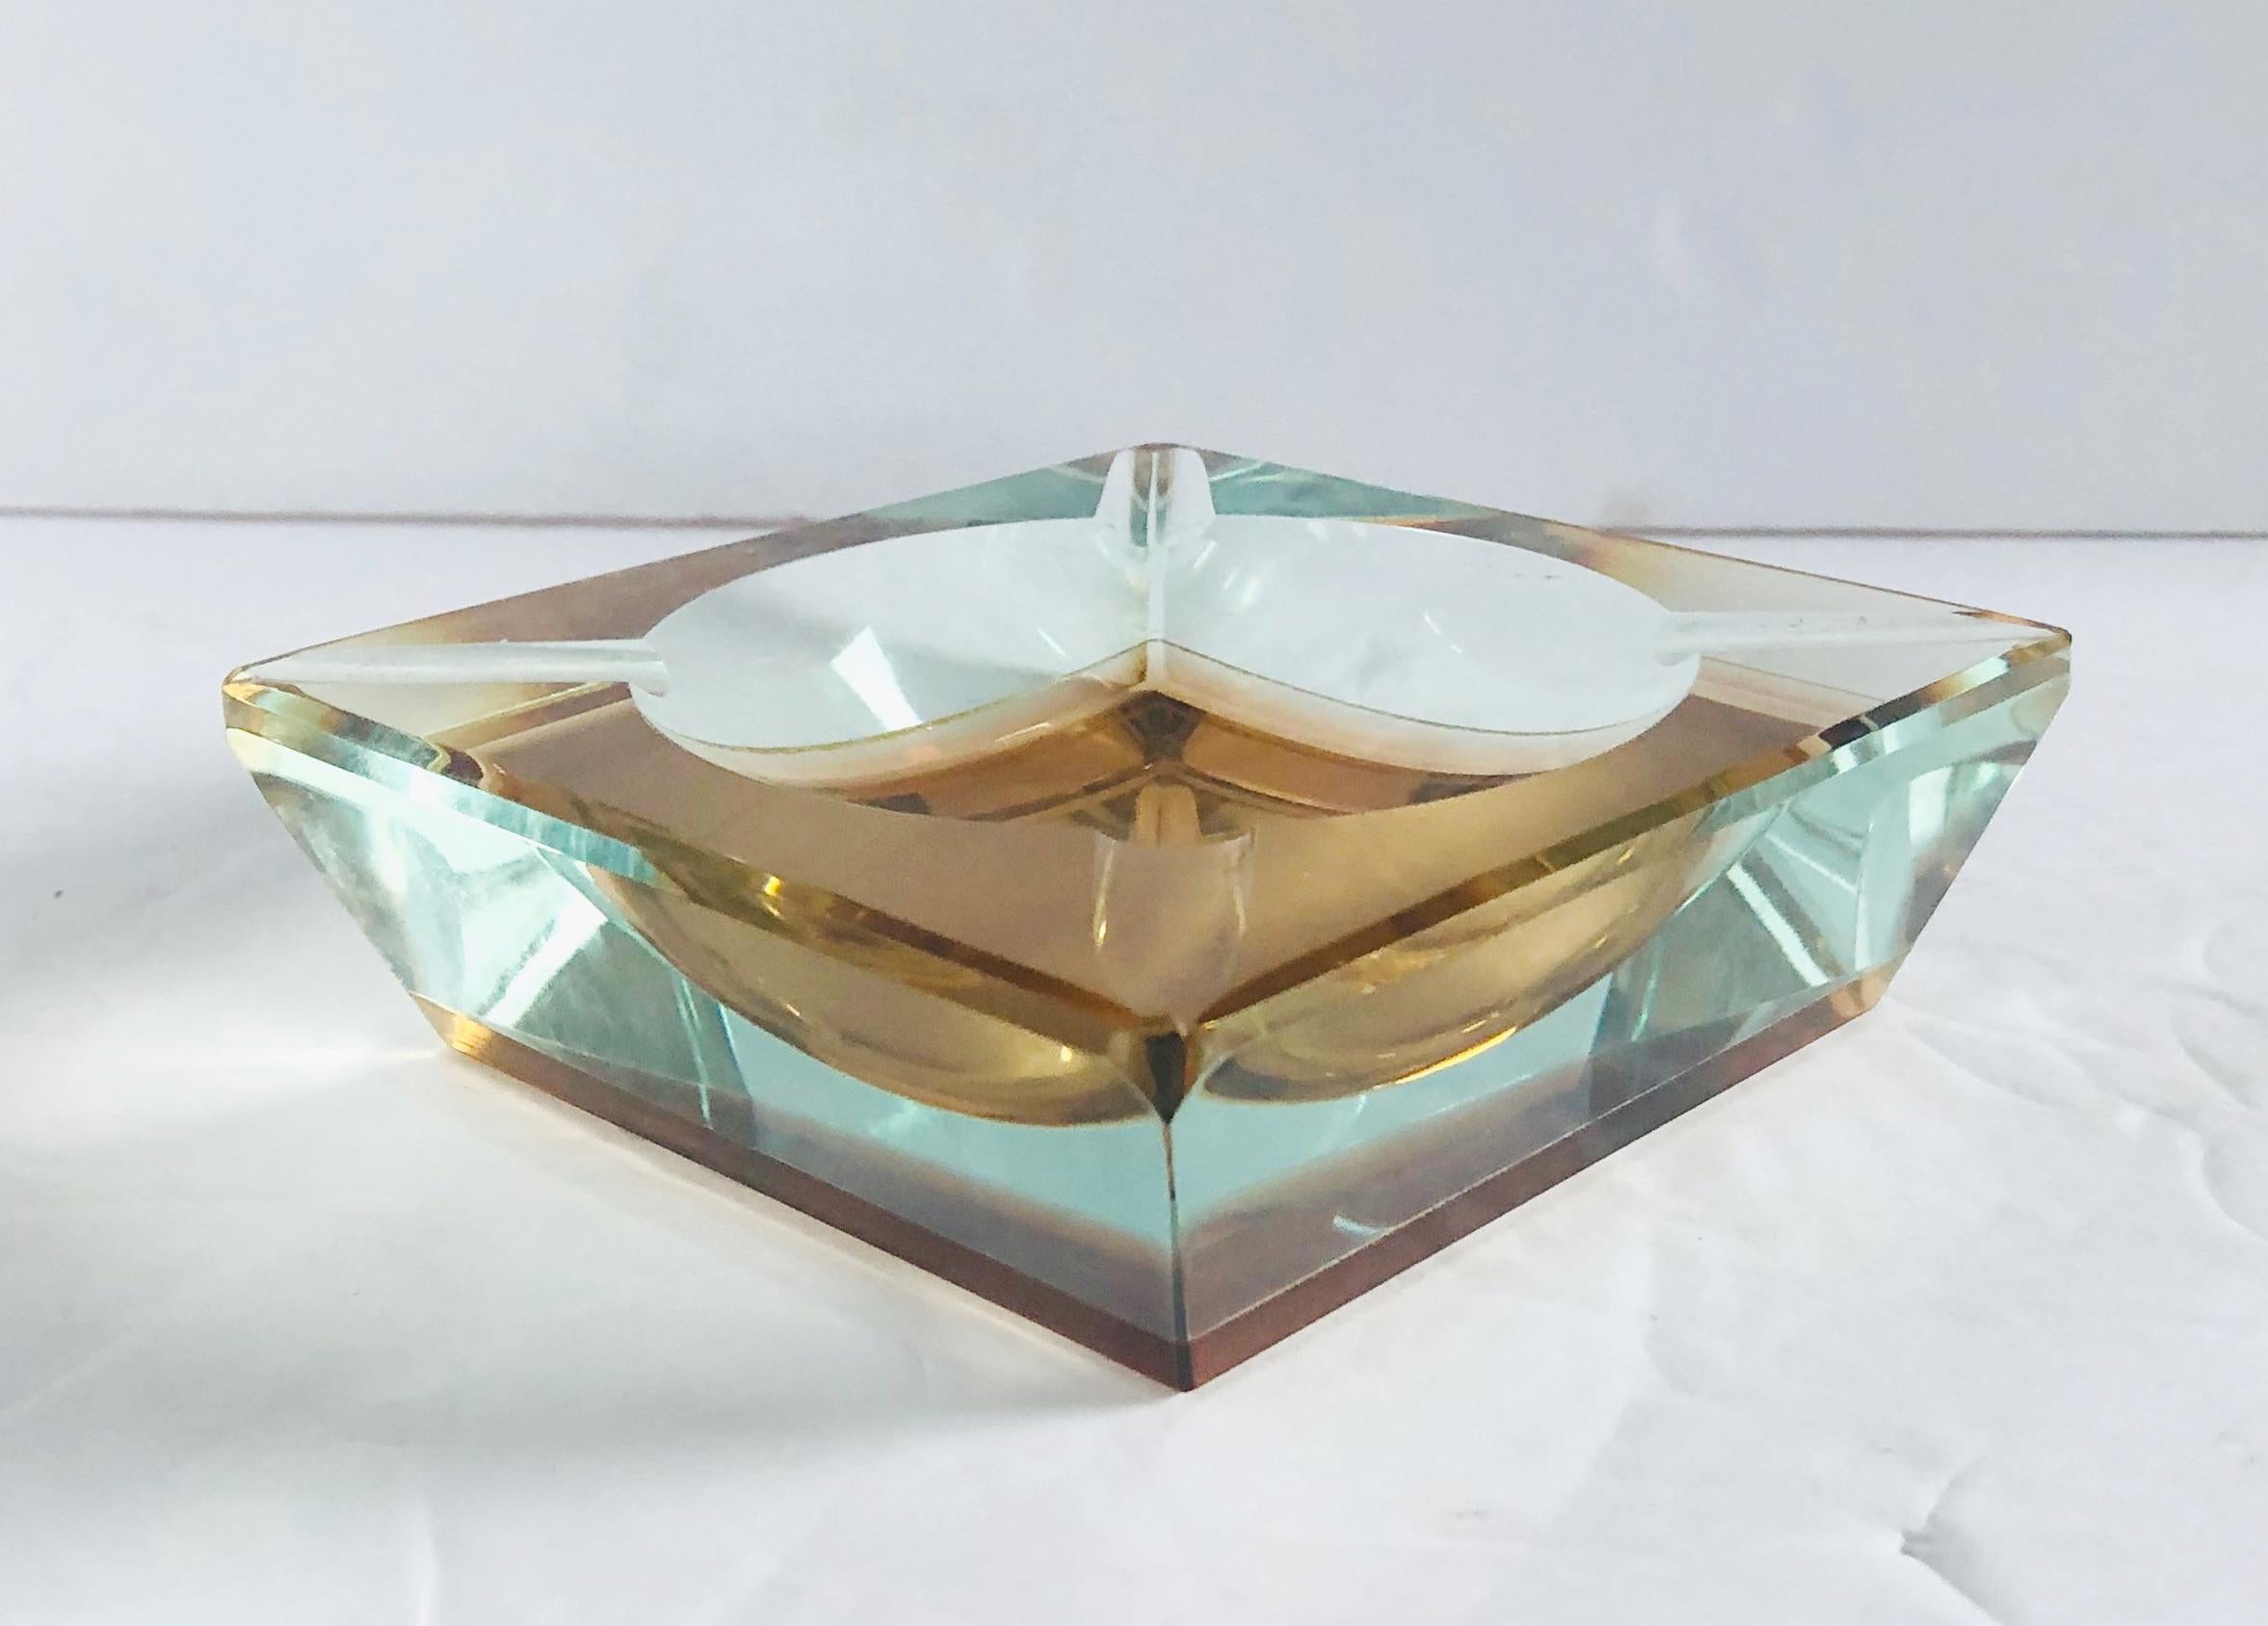 Vintage Italian amber faceted Murano glass ashtray blown in Sommerso technique / Designed by Mandruzzato circa 1960s / Made in Italy
Length: 4.75 inches / Width: 4.75 inches / Height: 1.5 inches
Order Reference #: FABIOLTD G110
This piece makes for